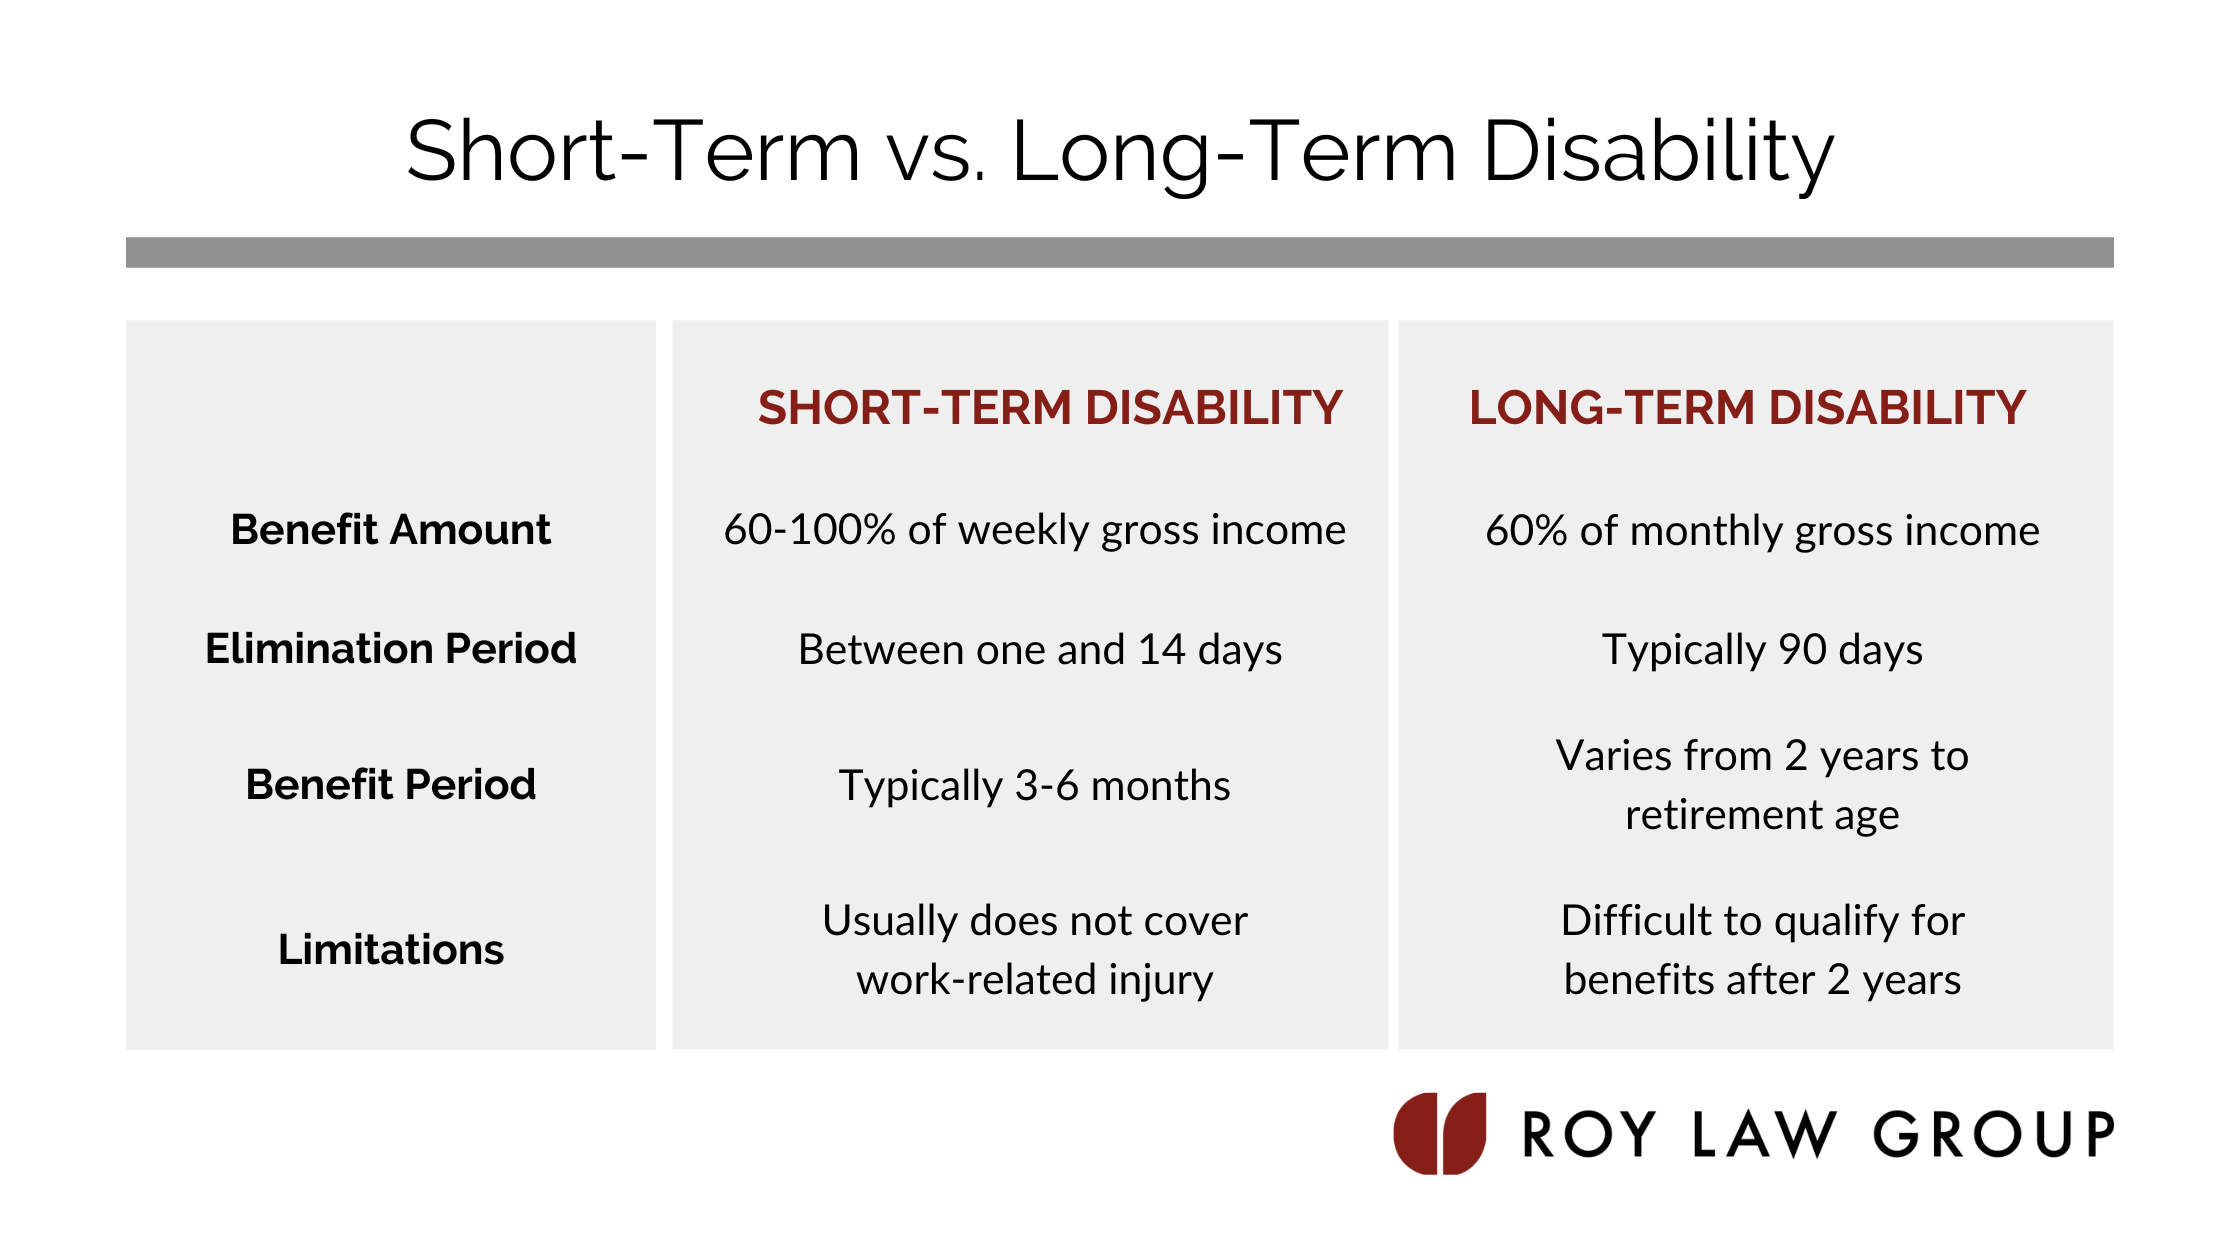 ShortTerm vs. LongTerm Disability Insurance What's the Difference?